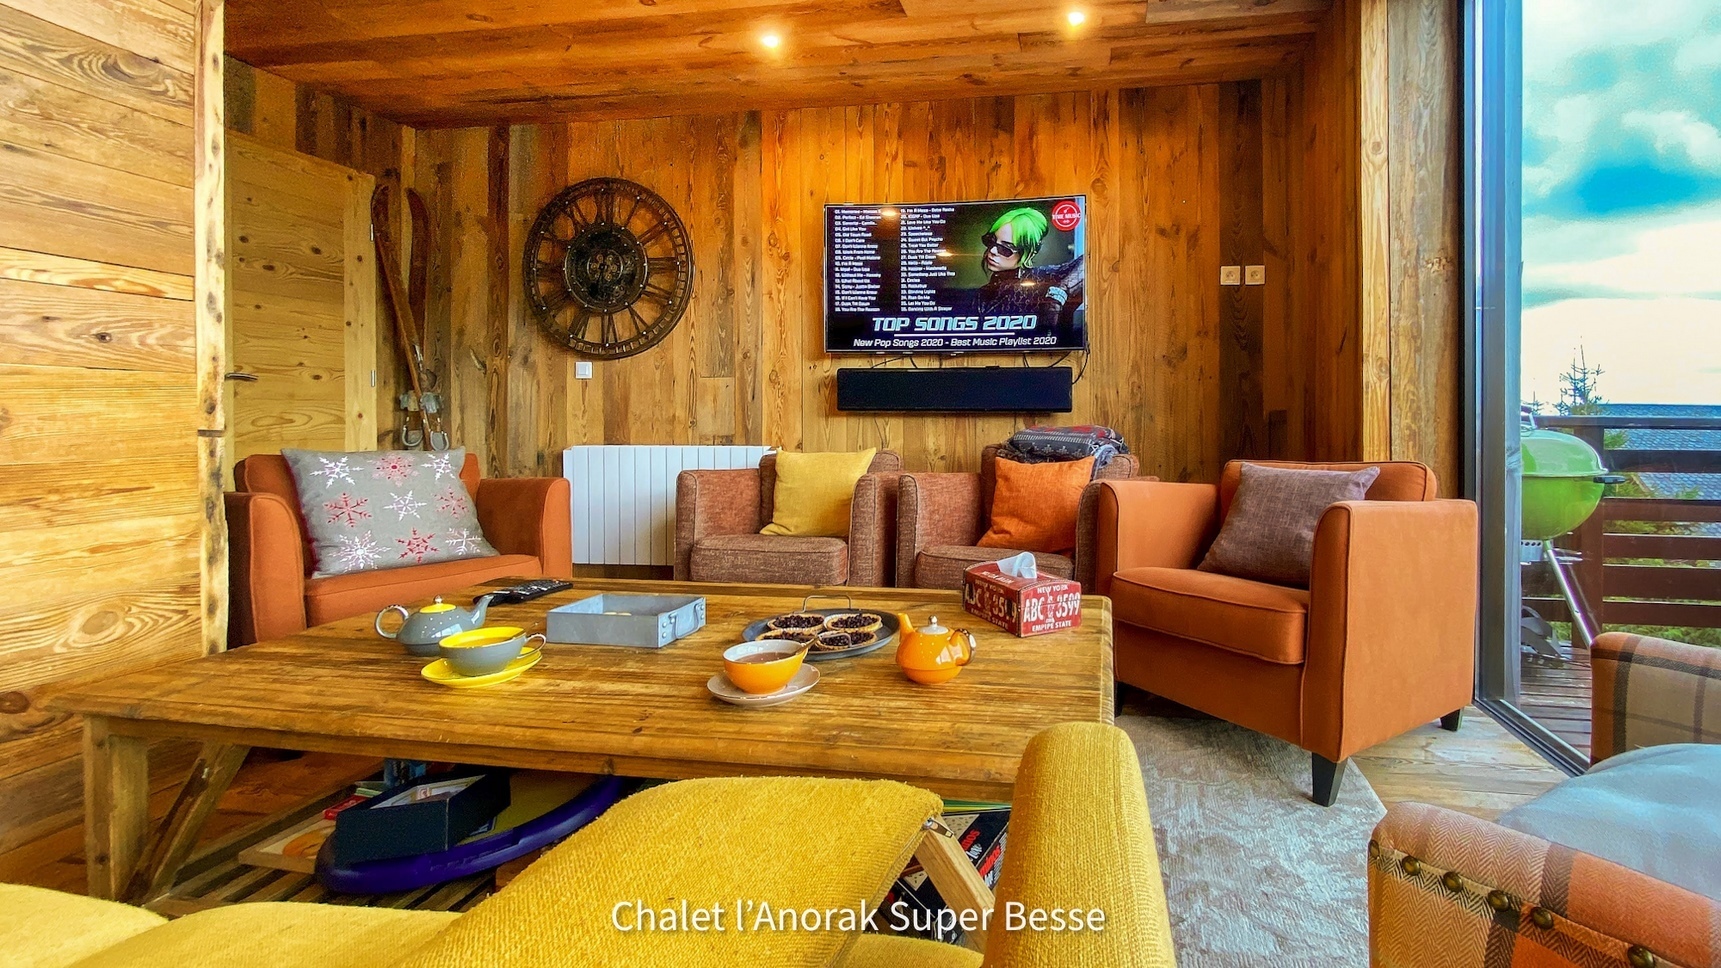 Chalet l'Anorak in Super Besse, the Chalet Lounge